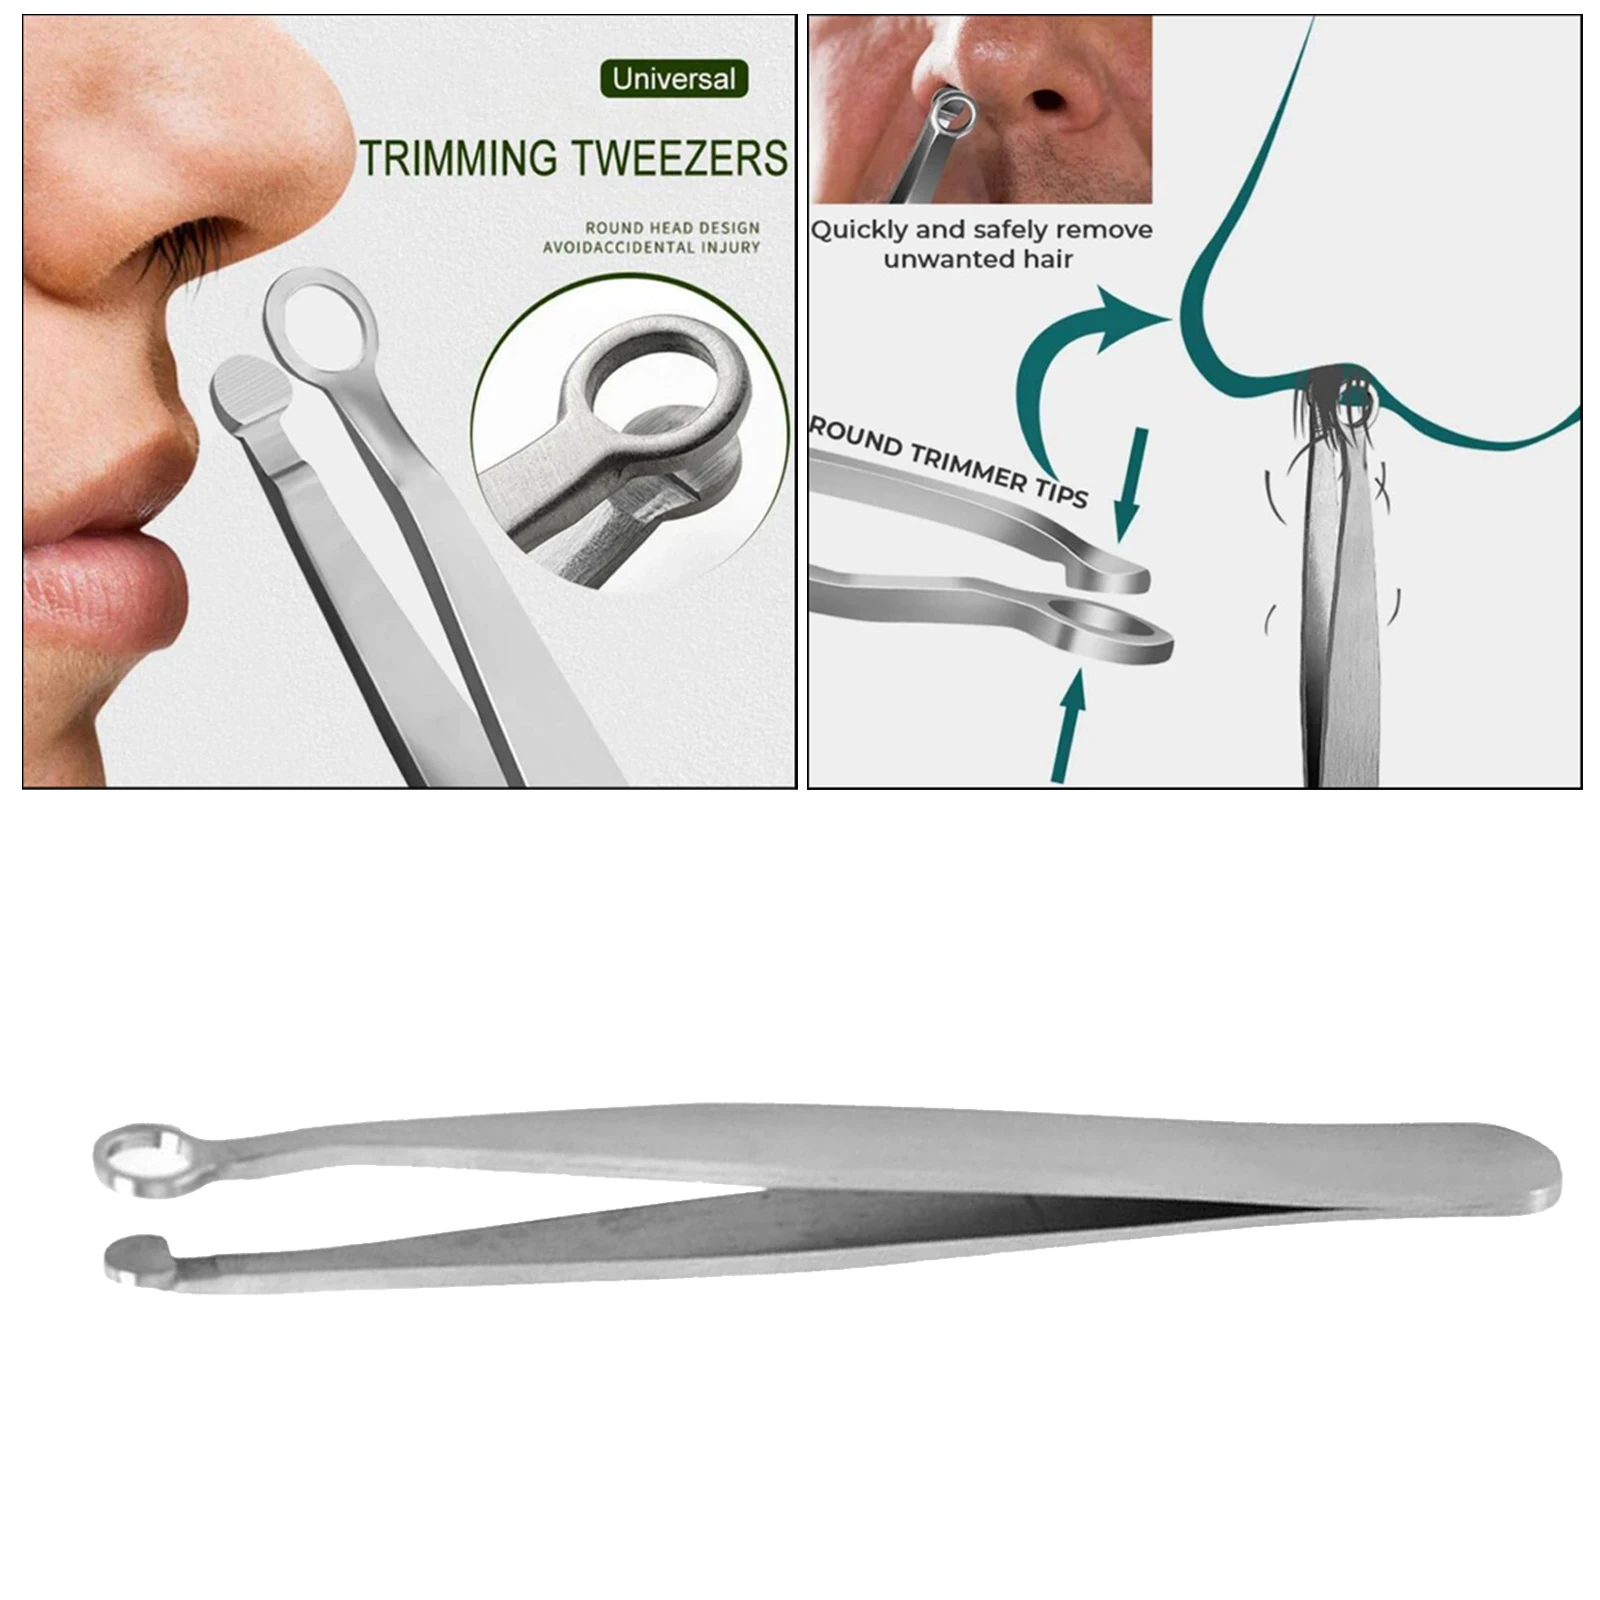 Stainless Steel Nose Hair Trimming Tweezers Safe Face Hair Trimmer Round Tip Design for Nose Shaving Makeup Tools 